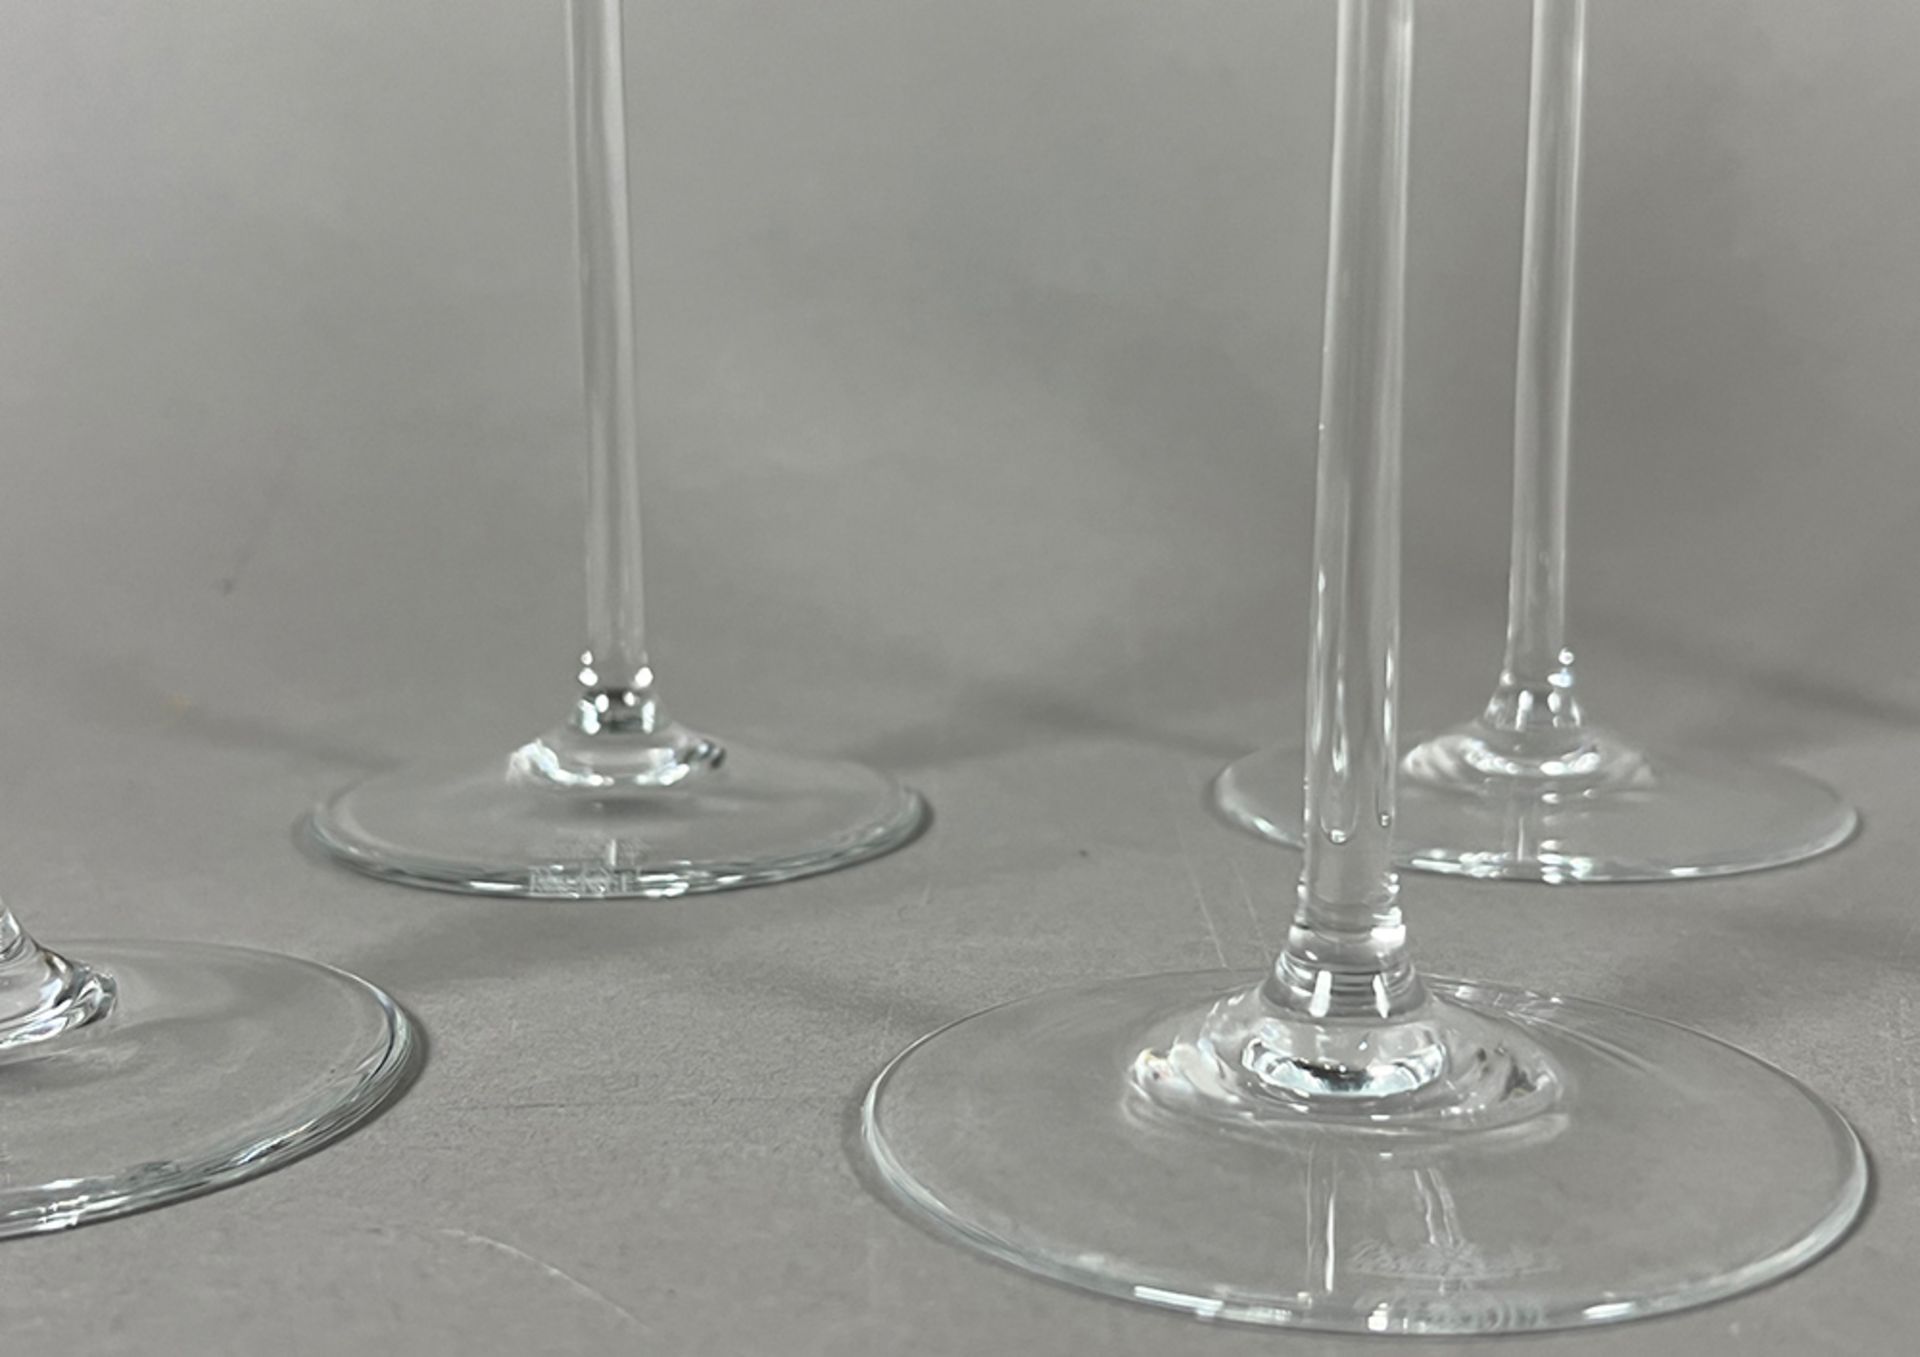 VERSACE by ROSENTHAL. "Medusa Lumiere". 6-piece set of wine glasses. - Image 7 of 8